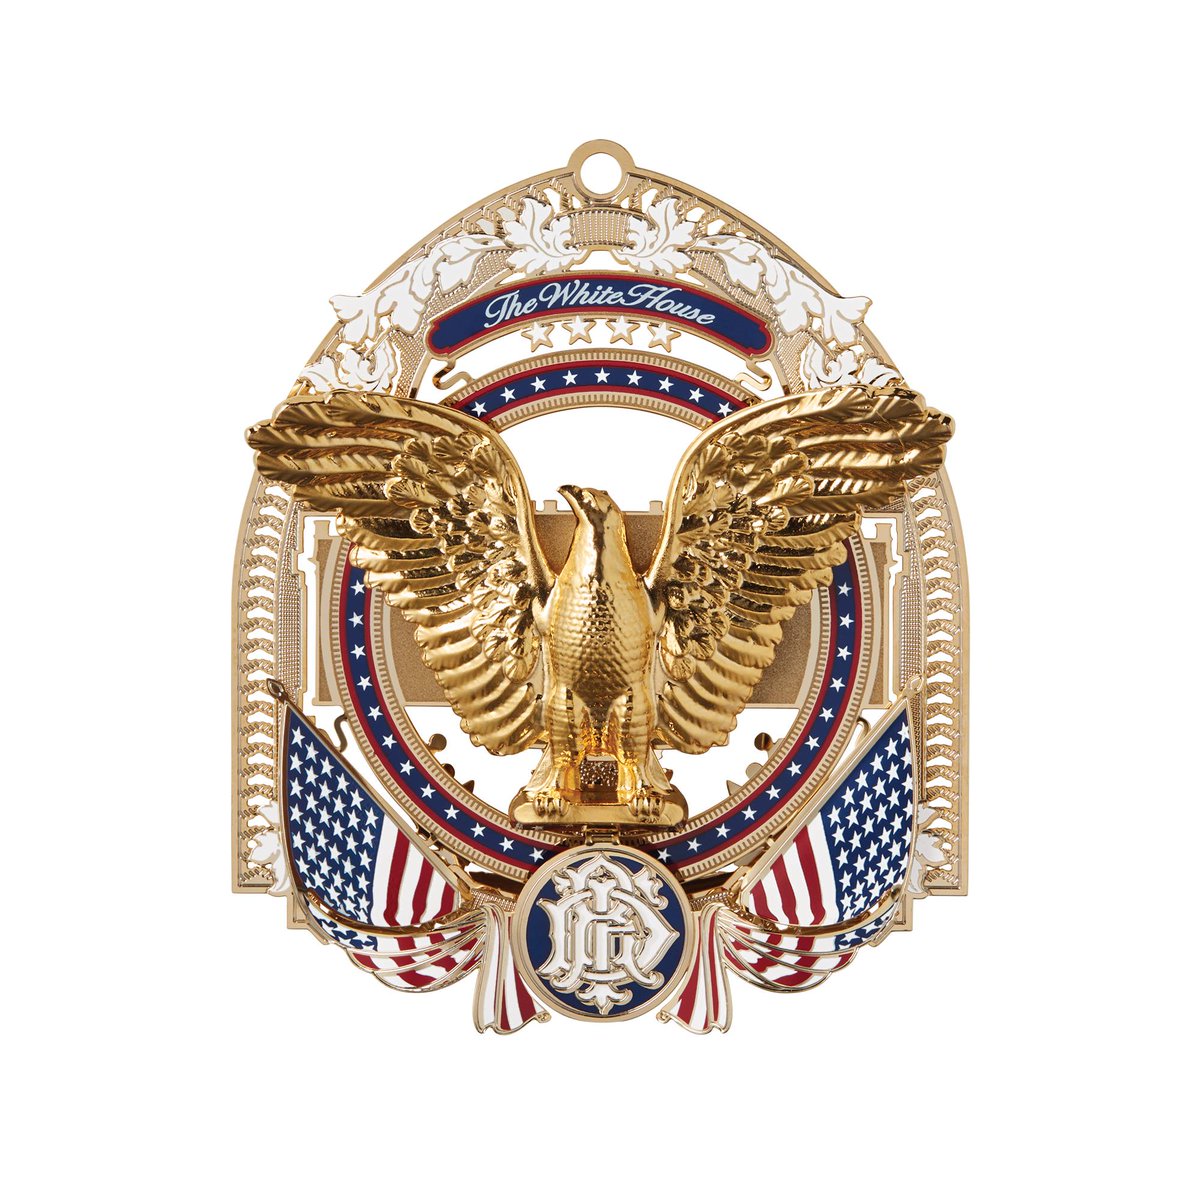 The official 2017 ornament honors the administration of Franklin Roosevelt with elements from his time as our 32nd and longest-serving president, including the eagle cartouche from Roosevelt's first inauguration and his beloved dog Fala.Purchase yours:  https://shop.whitehousehistory.org/holidays/ornaments/2017-white-house-christmas-ornament